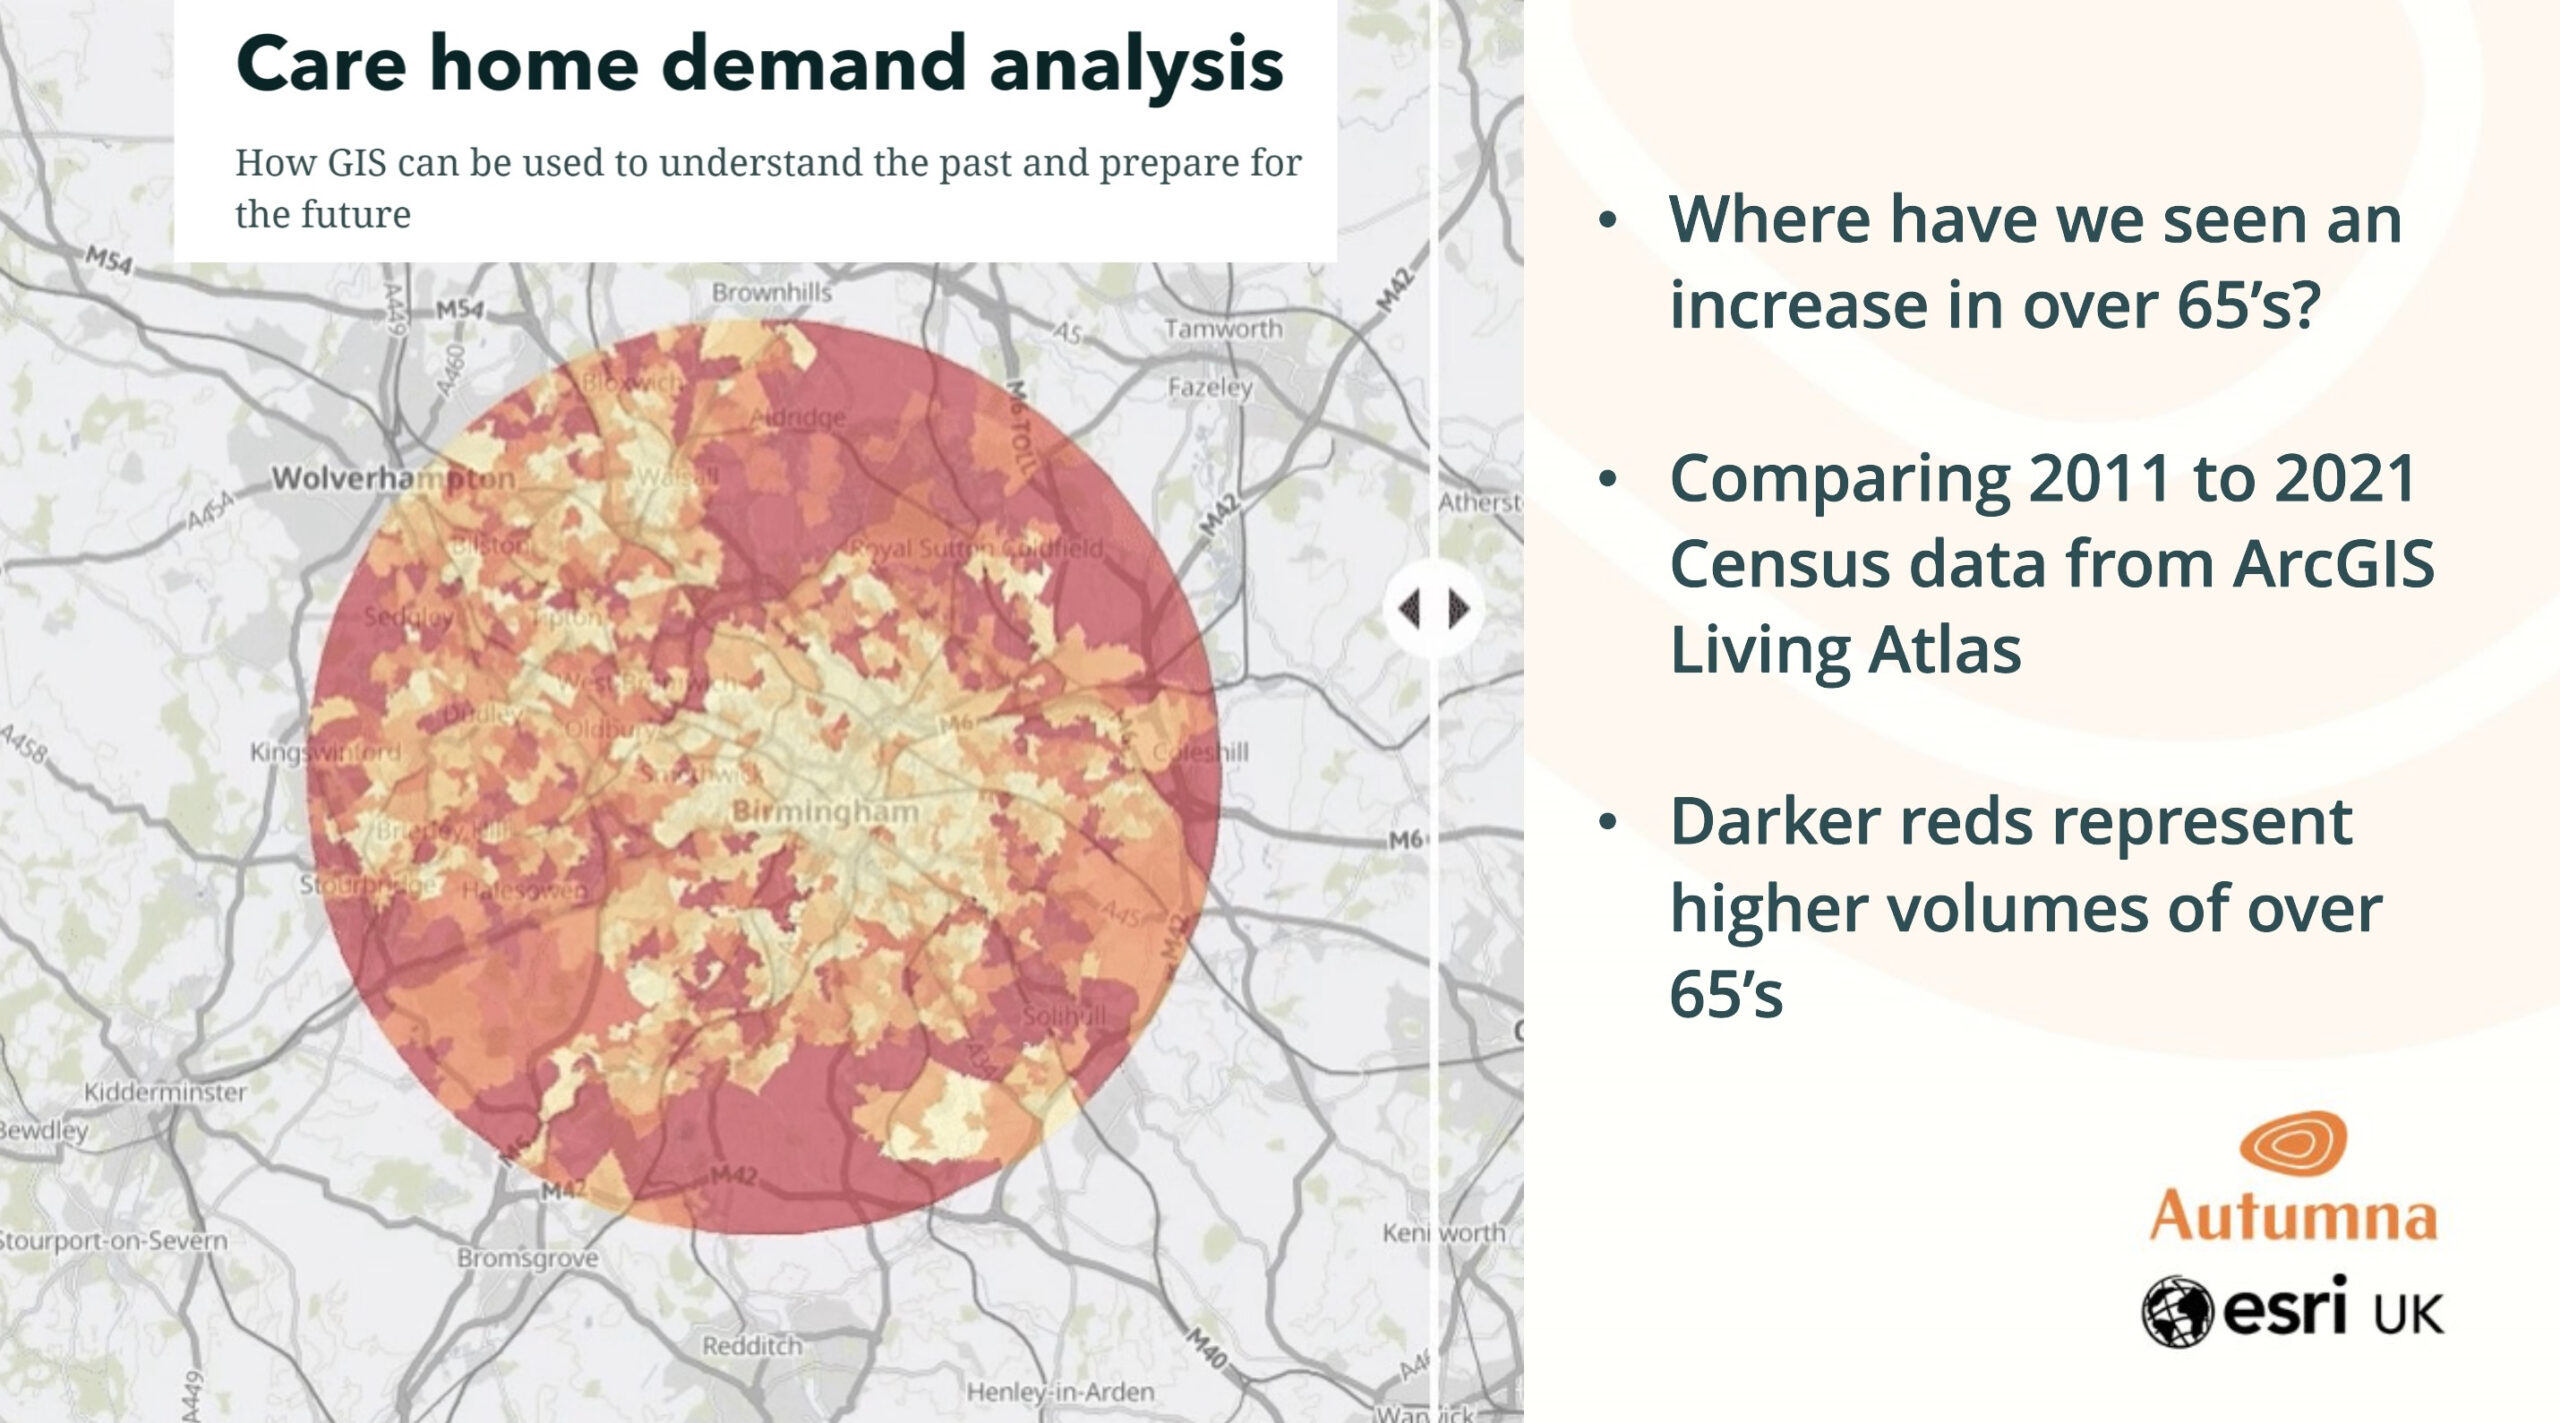 Location intelligence reaps benefits in social care